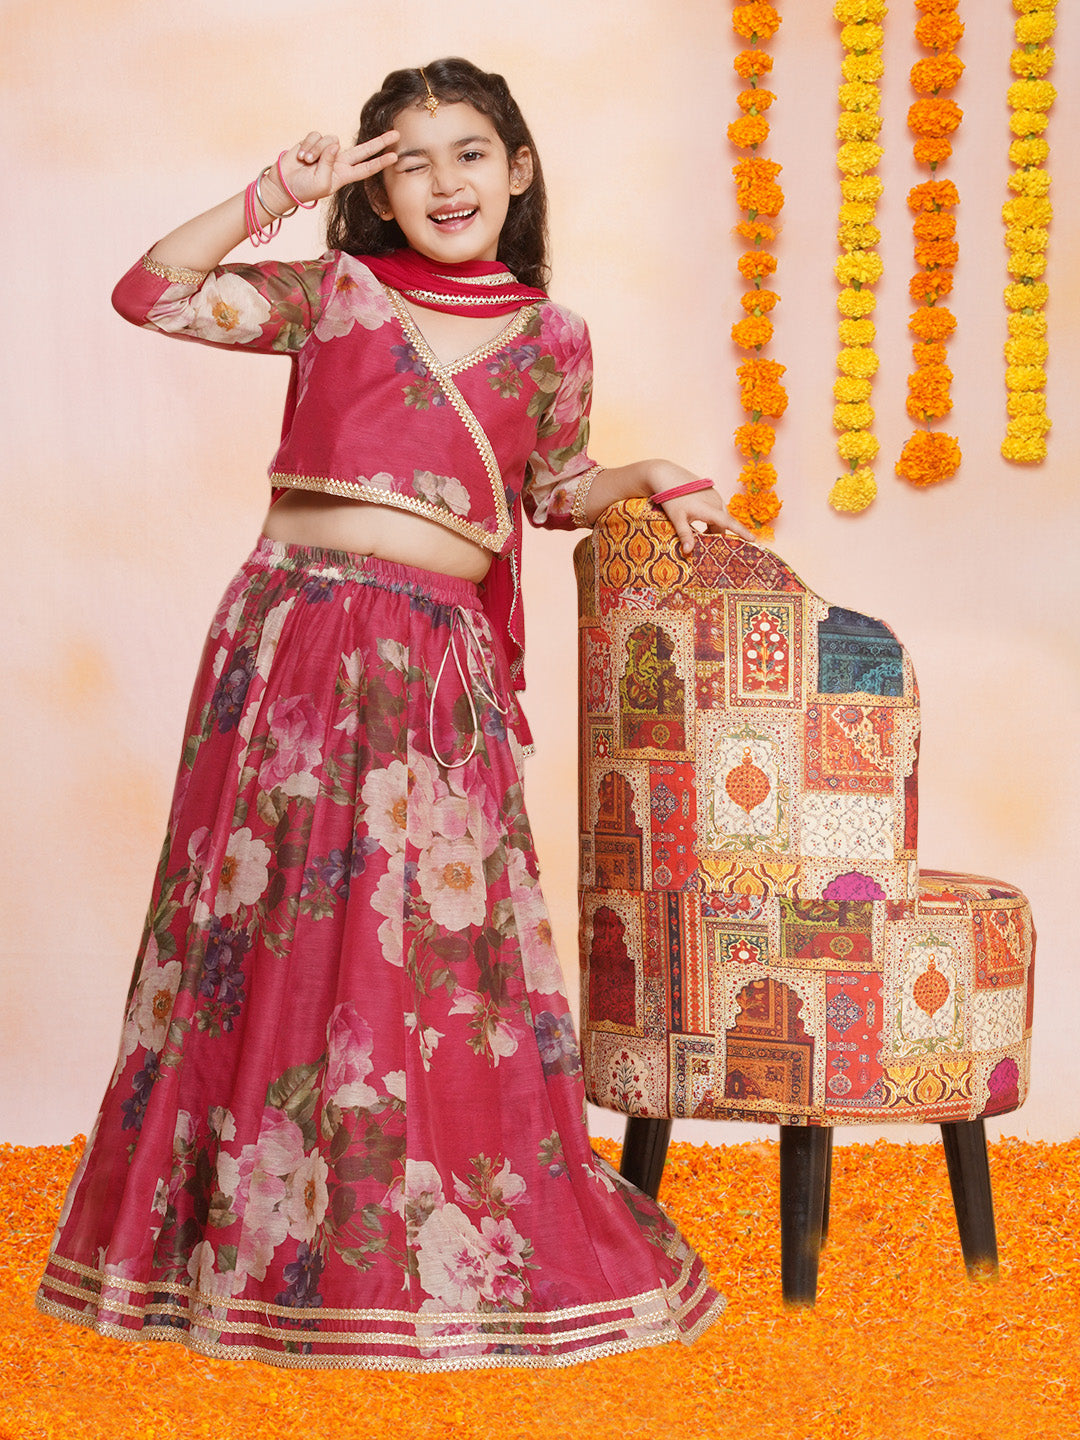 Girls Maroon Floral Printed Ready to Wear Lehenga & Blouse With Dupatta